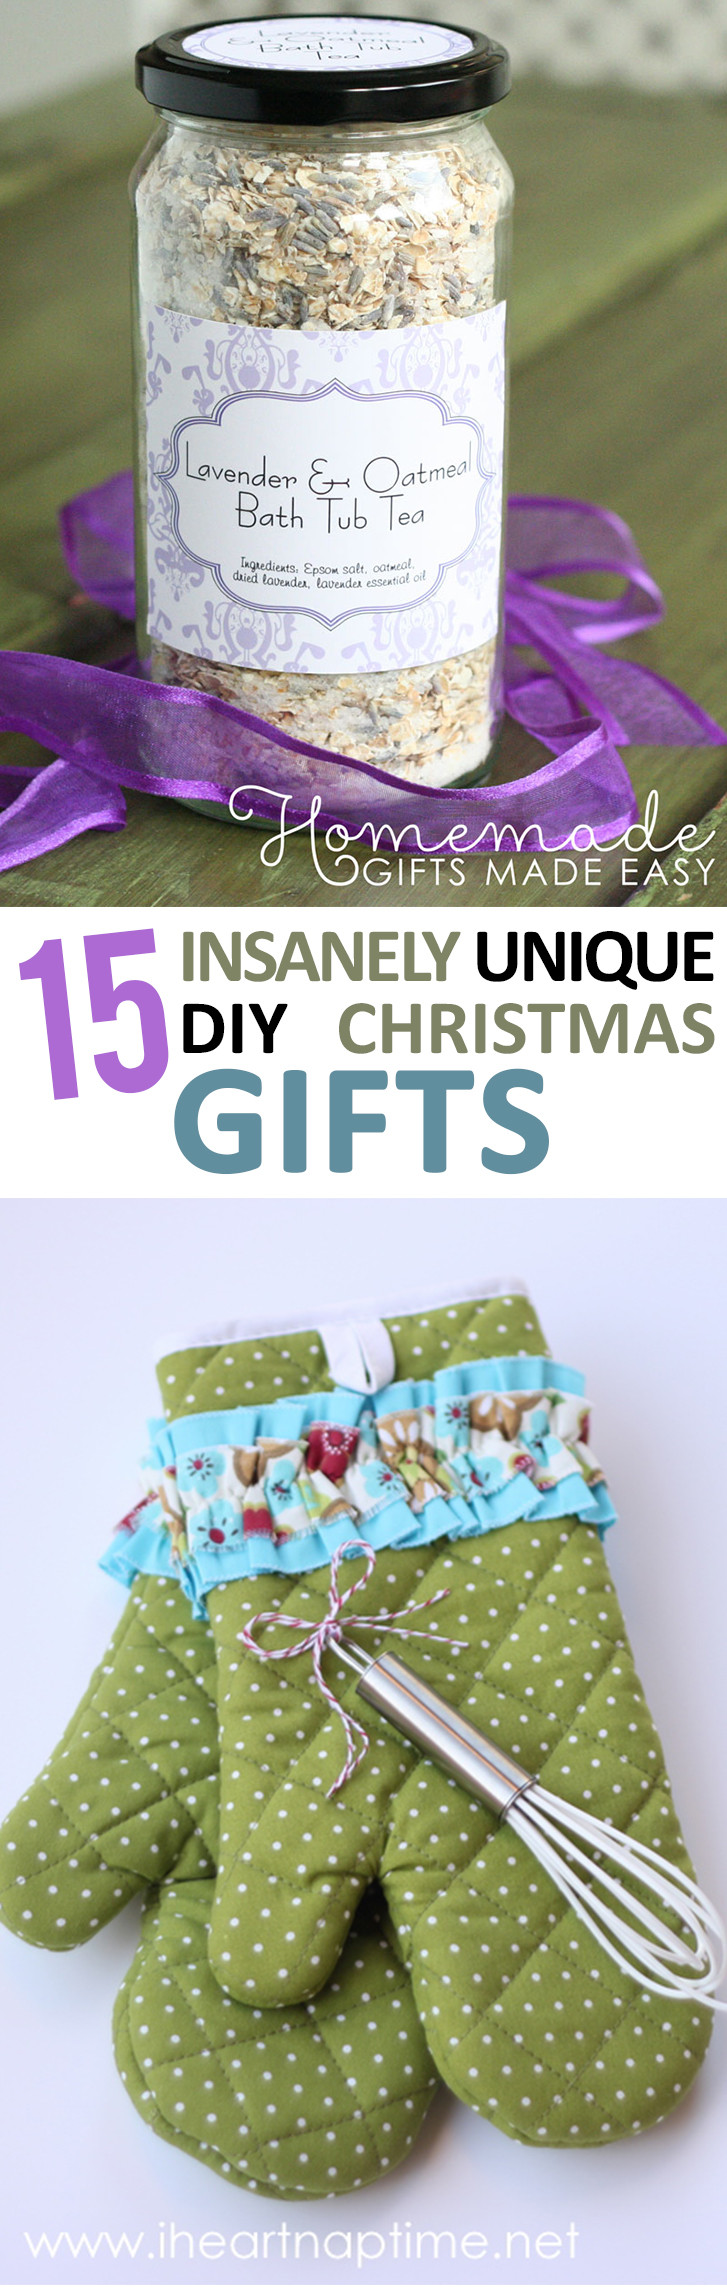 Fun DIY Christmas Gifts
 15 Insanely Unique DIY Christmas Gifts – Sunlit Spaces